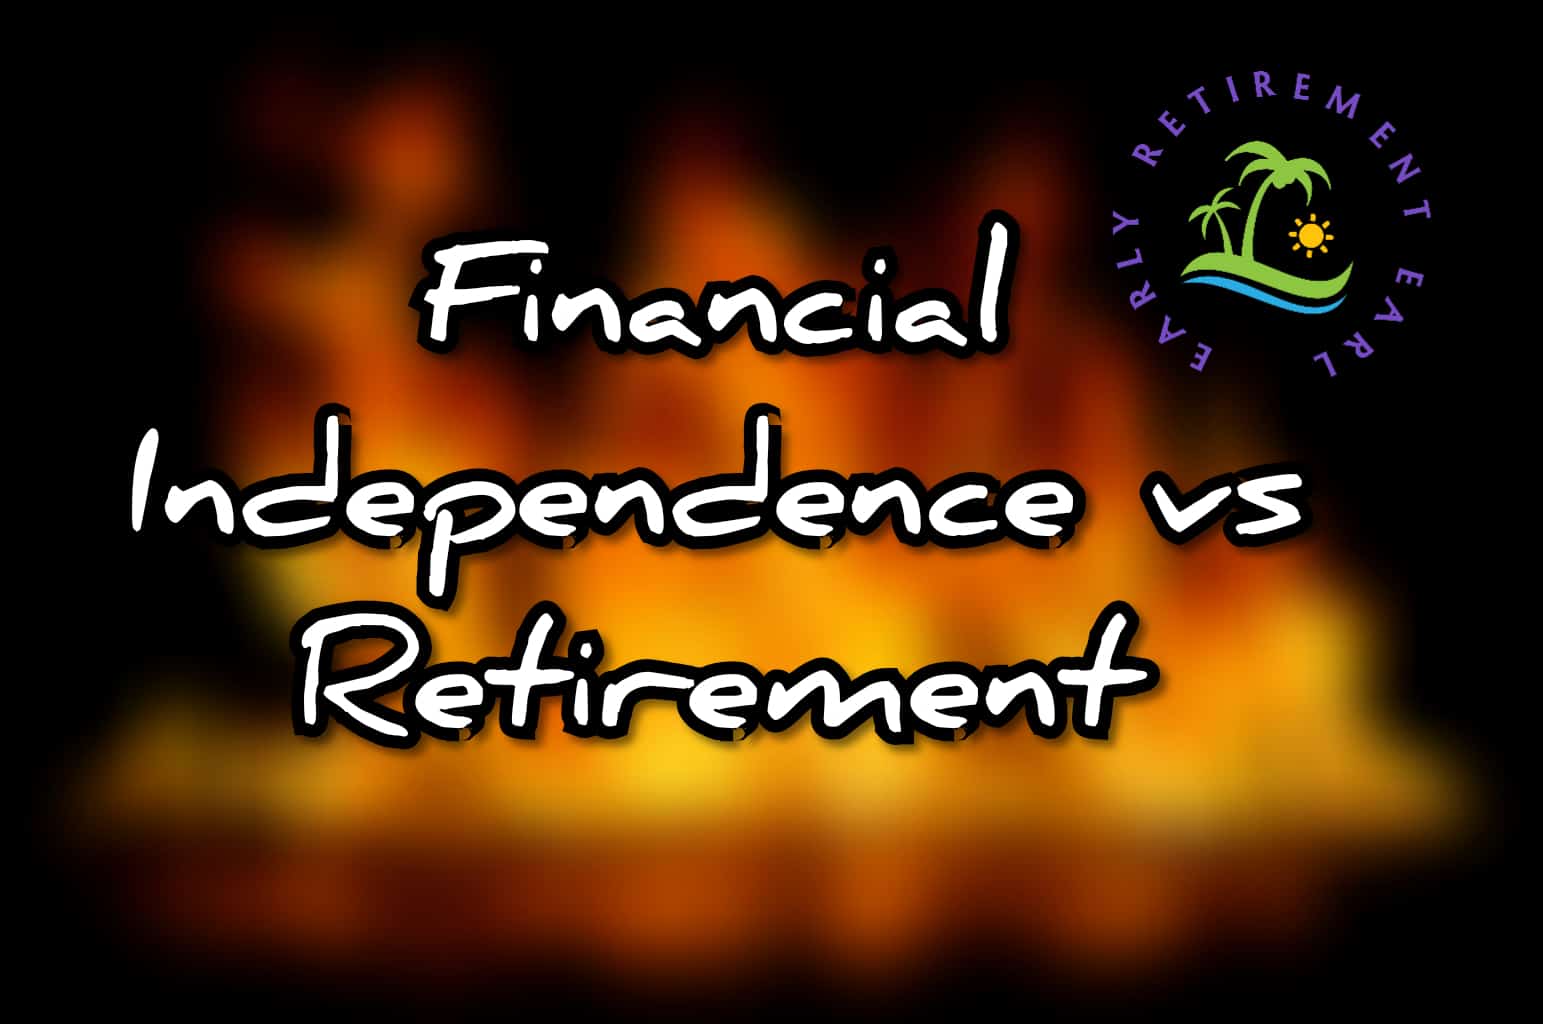 Financial Independence vs Retirement: What’s the Difference?